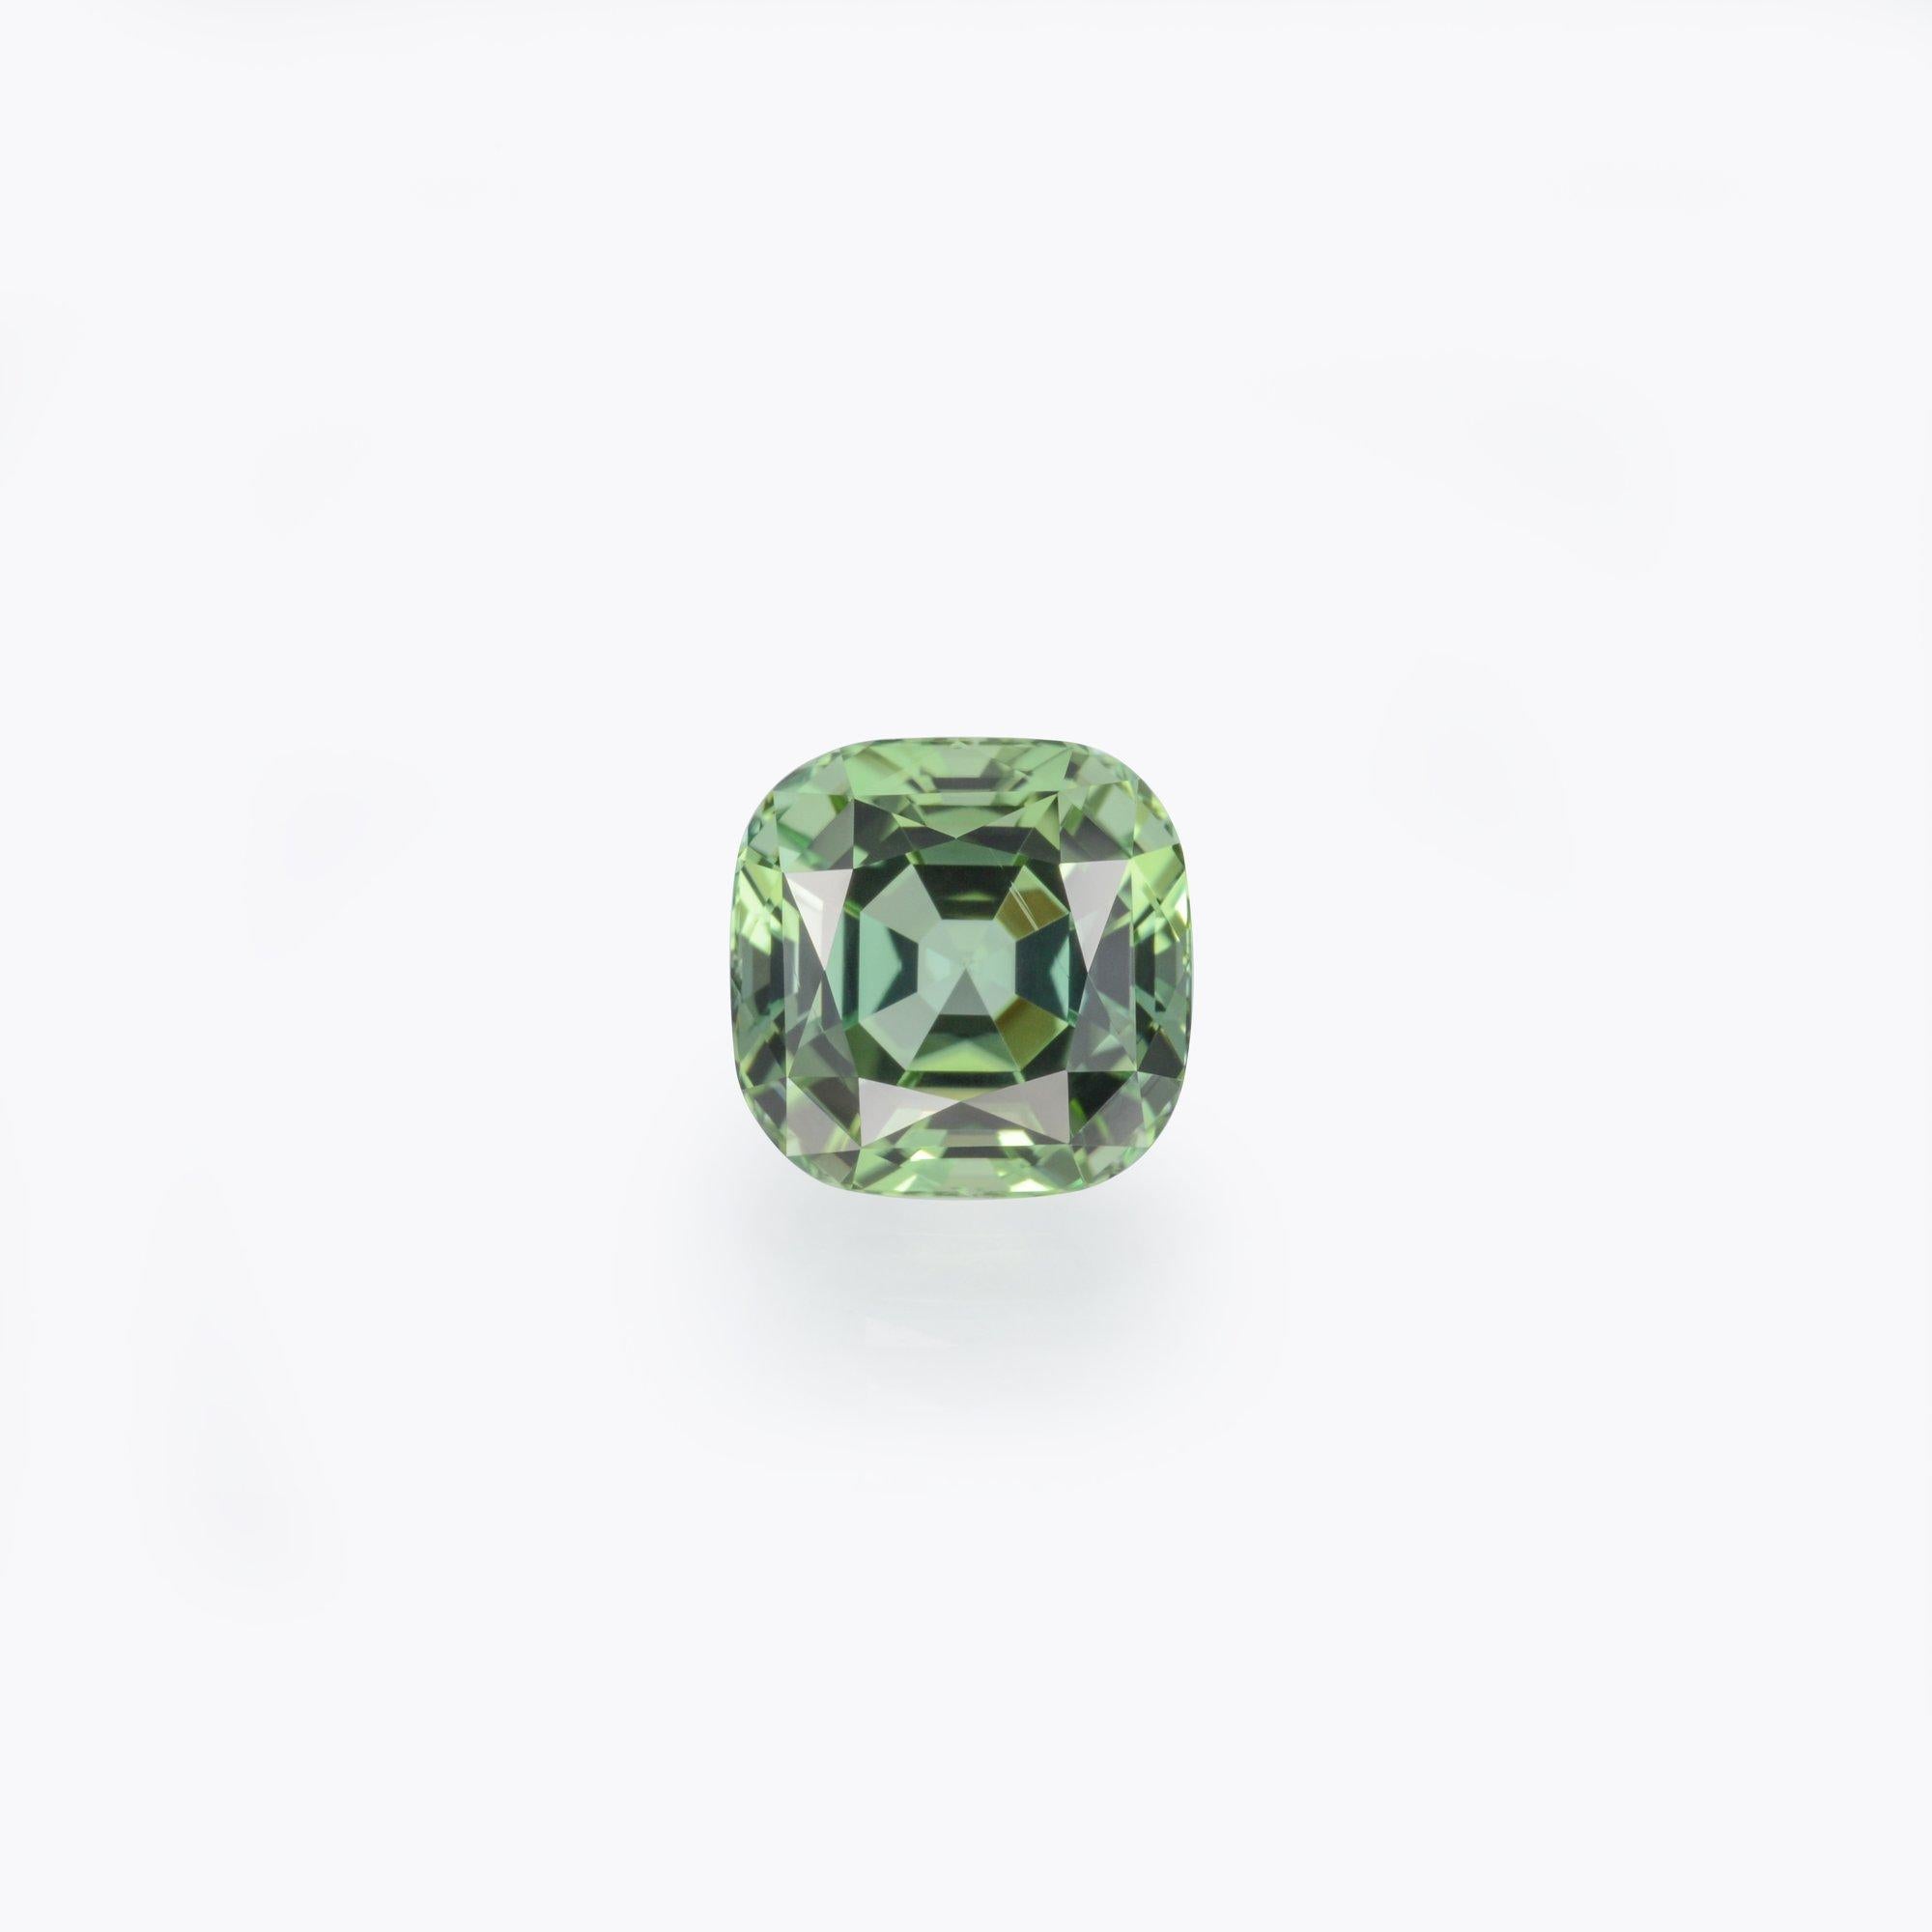 Exquisite 5.27 carat Mint Green Tourmaline cushion gem, offered loose to a classy lady or gentleman.
Returns are accepted and paid by us within 7 days of delivery.
We offer supreme custom jewelry work upon request. Please contact us for more